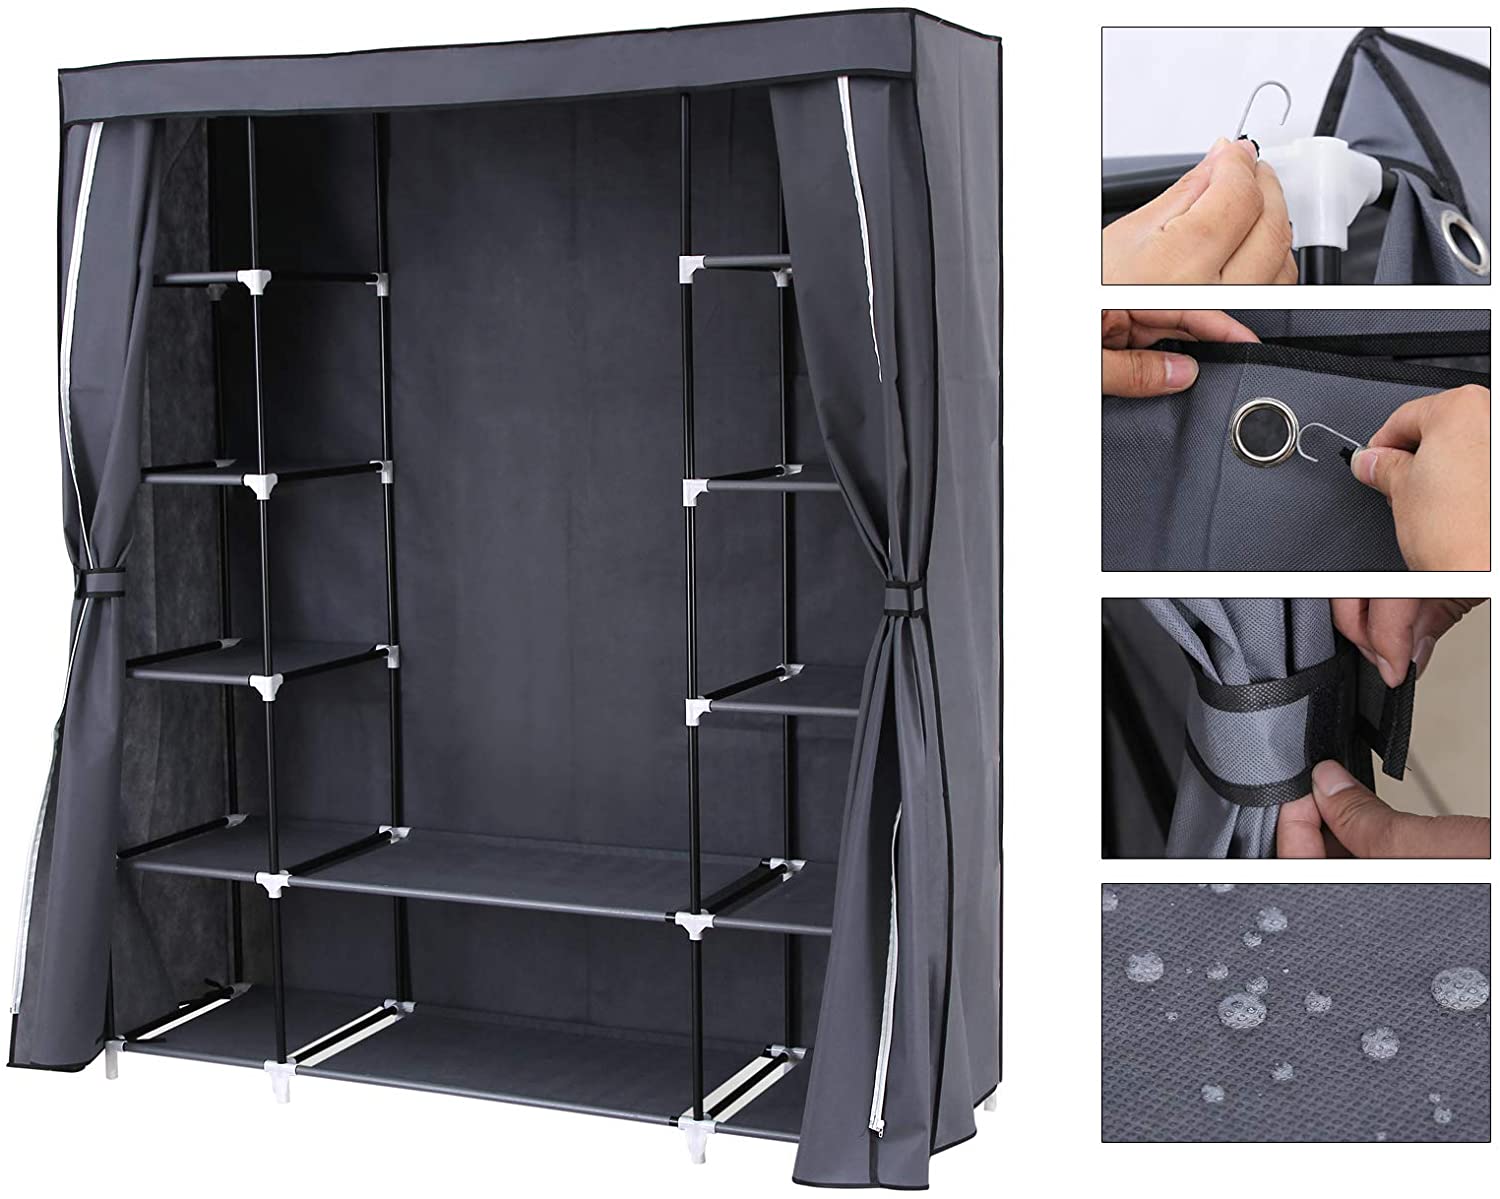 Newest product For school door fabric wardrobe closet with powder coated waterproof fabric wardrobe fornonwoven fabric wardrobe